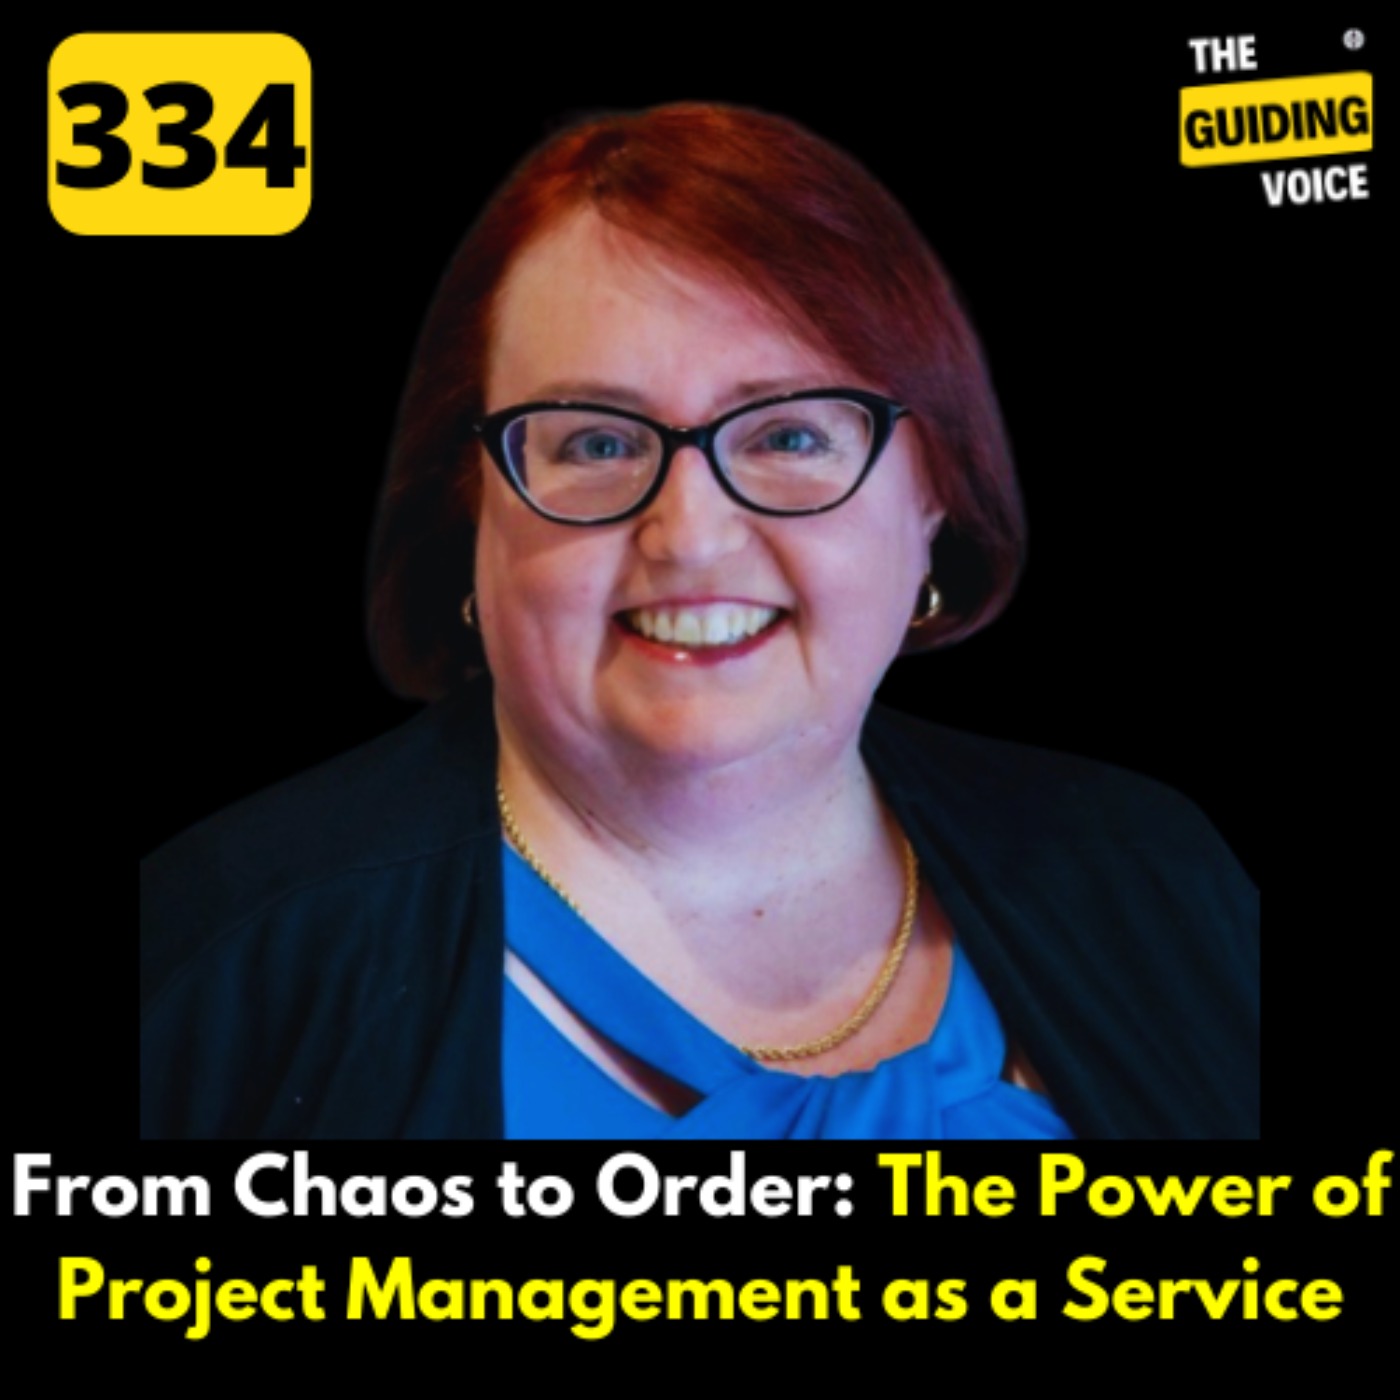 From Chaos to Order: The Power of Project Management as a Service  | Angela Thurman | #TGV334